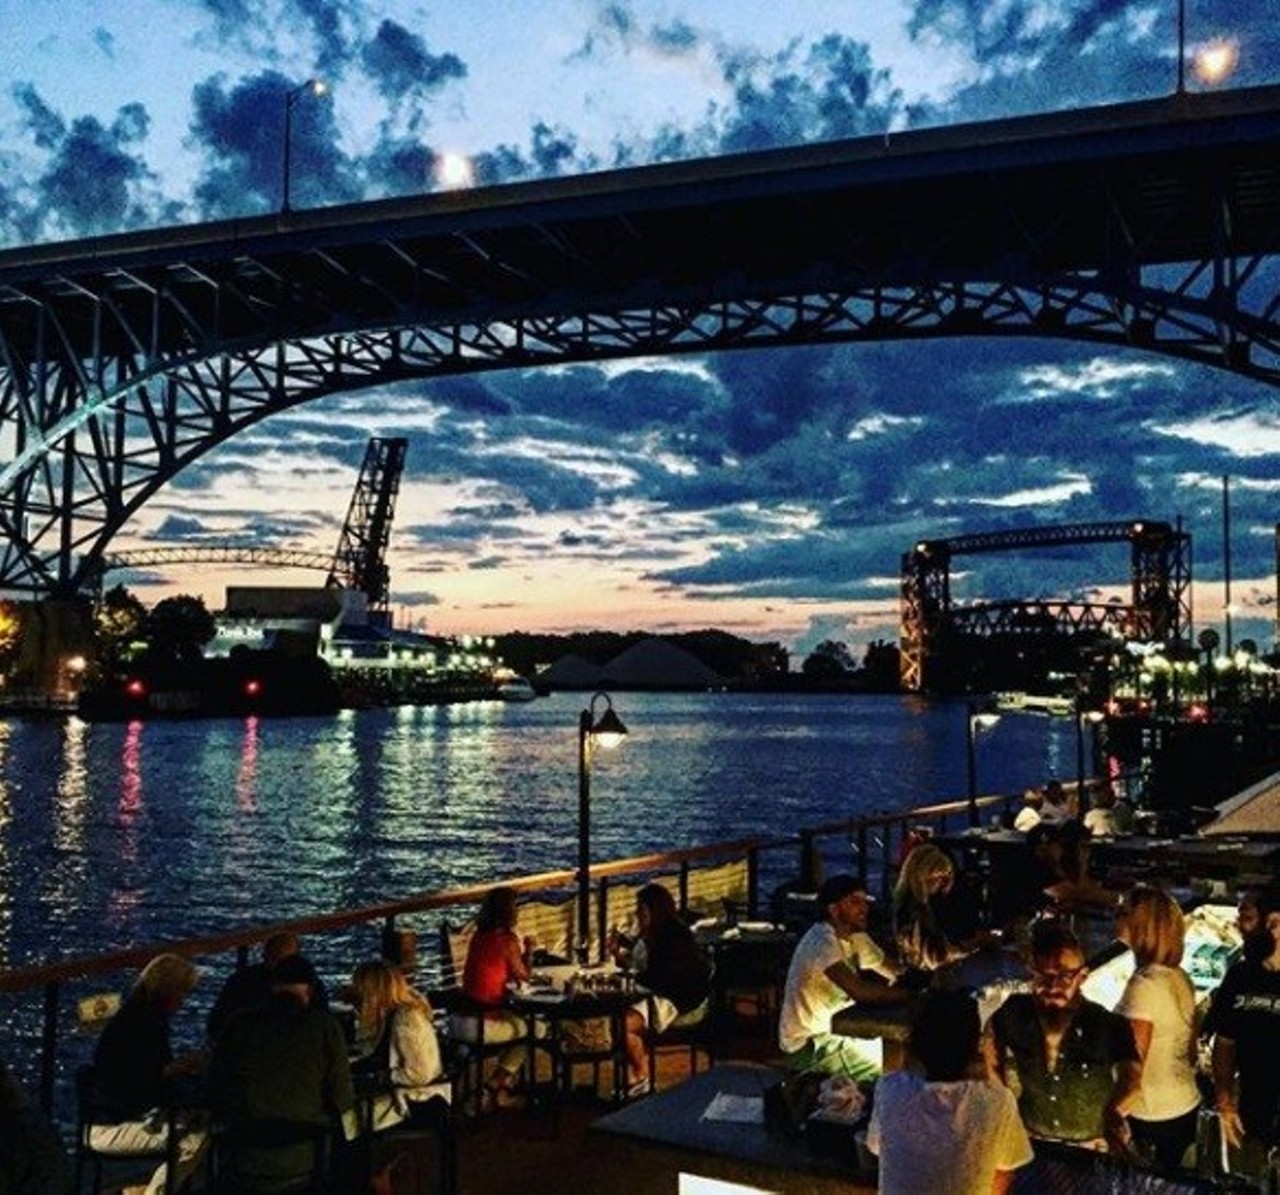  On the River in the Flats 
There are so many places to take a great shot for social media down in the Flats along the river. You can take a shot at a concert at Nautica, in front of a barge or at one of the bars along the river.
Photo via Scene Archives